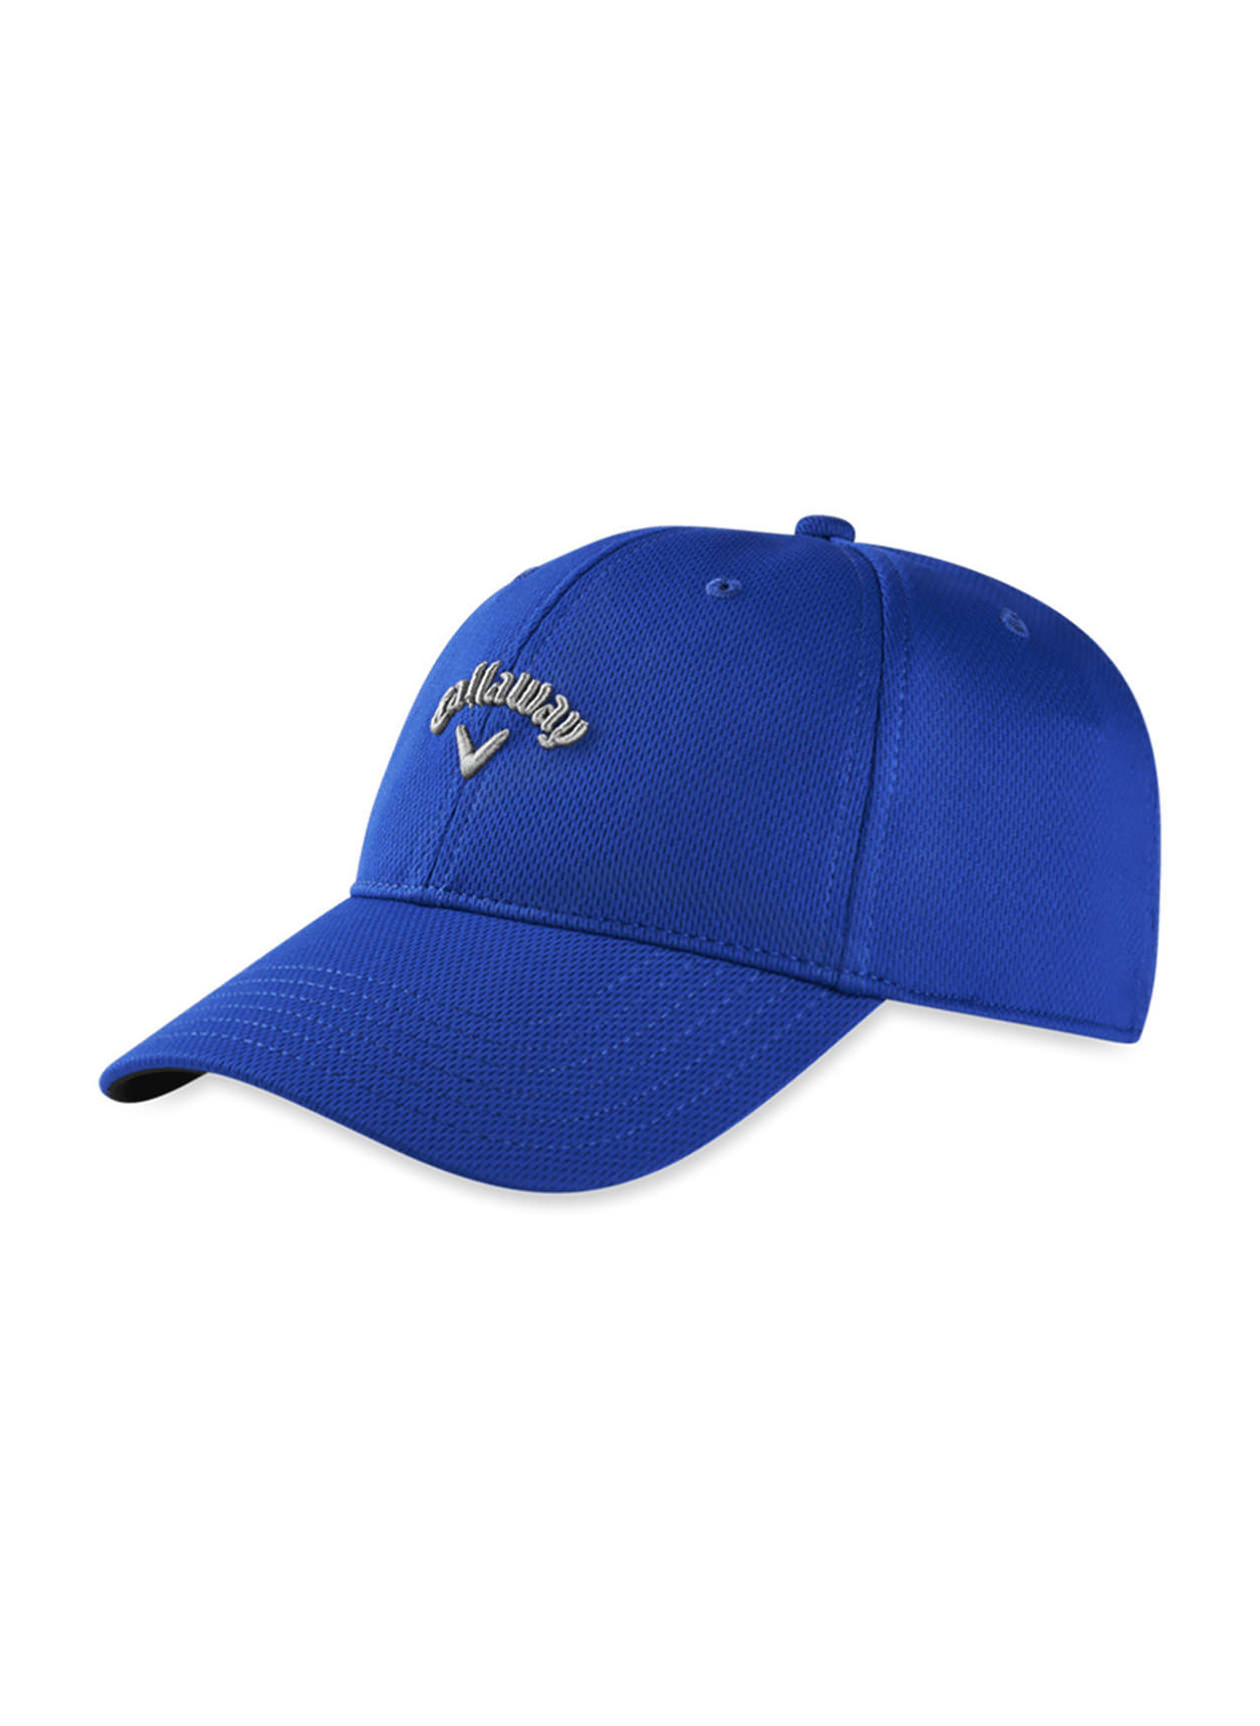 Callaway Golf Stretch Fitted Hat  Callaway Golf Custom Fitted Hats